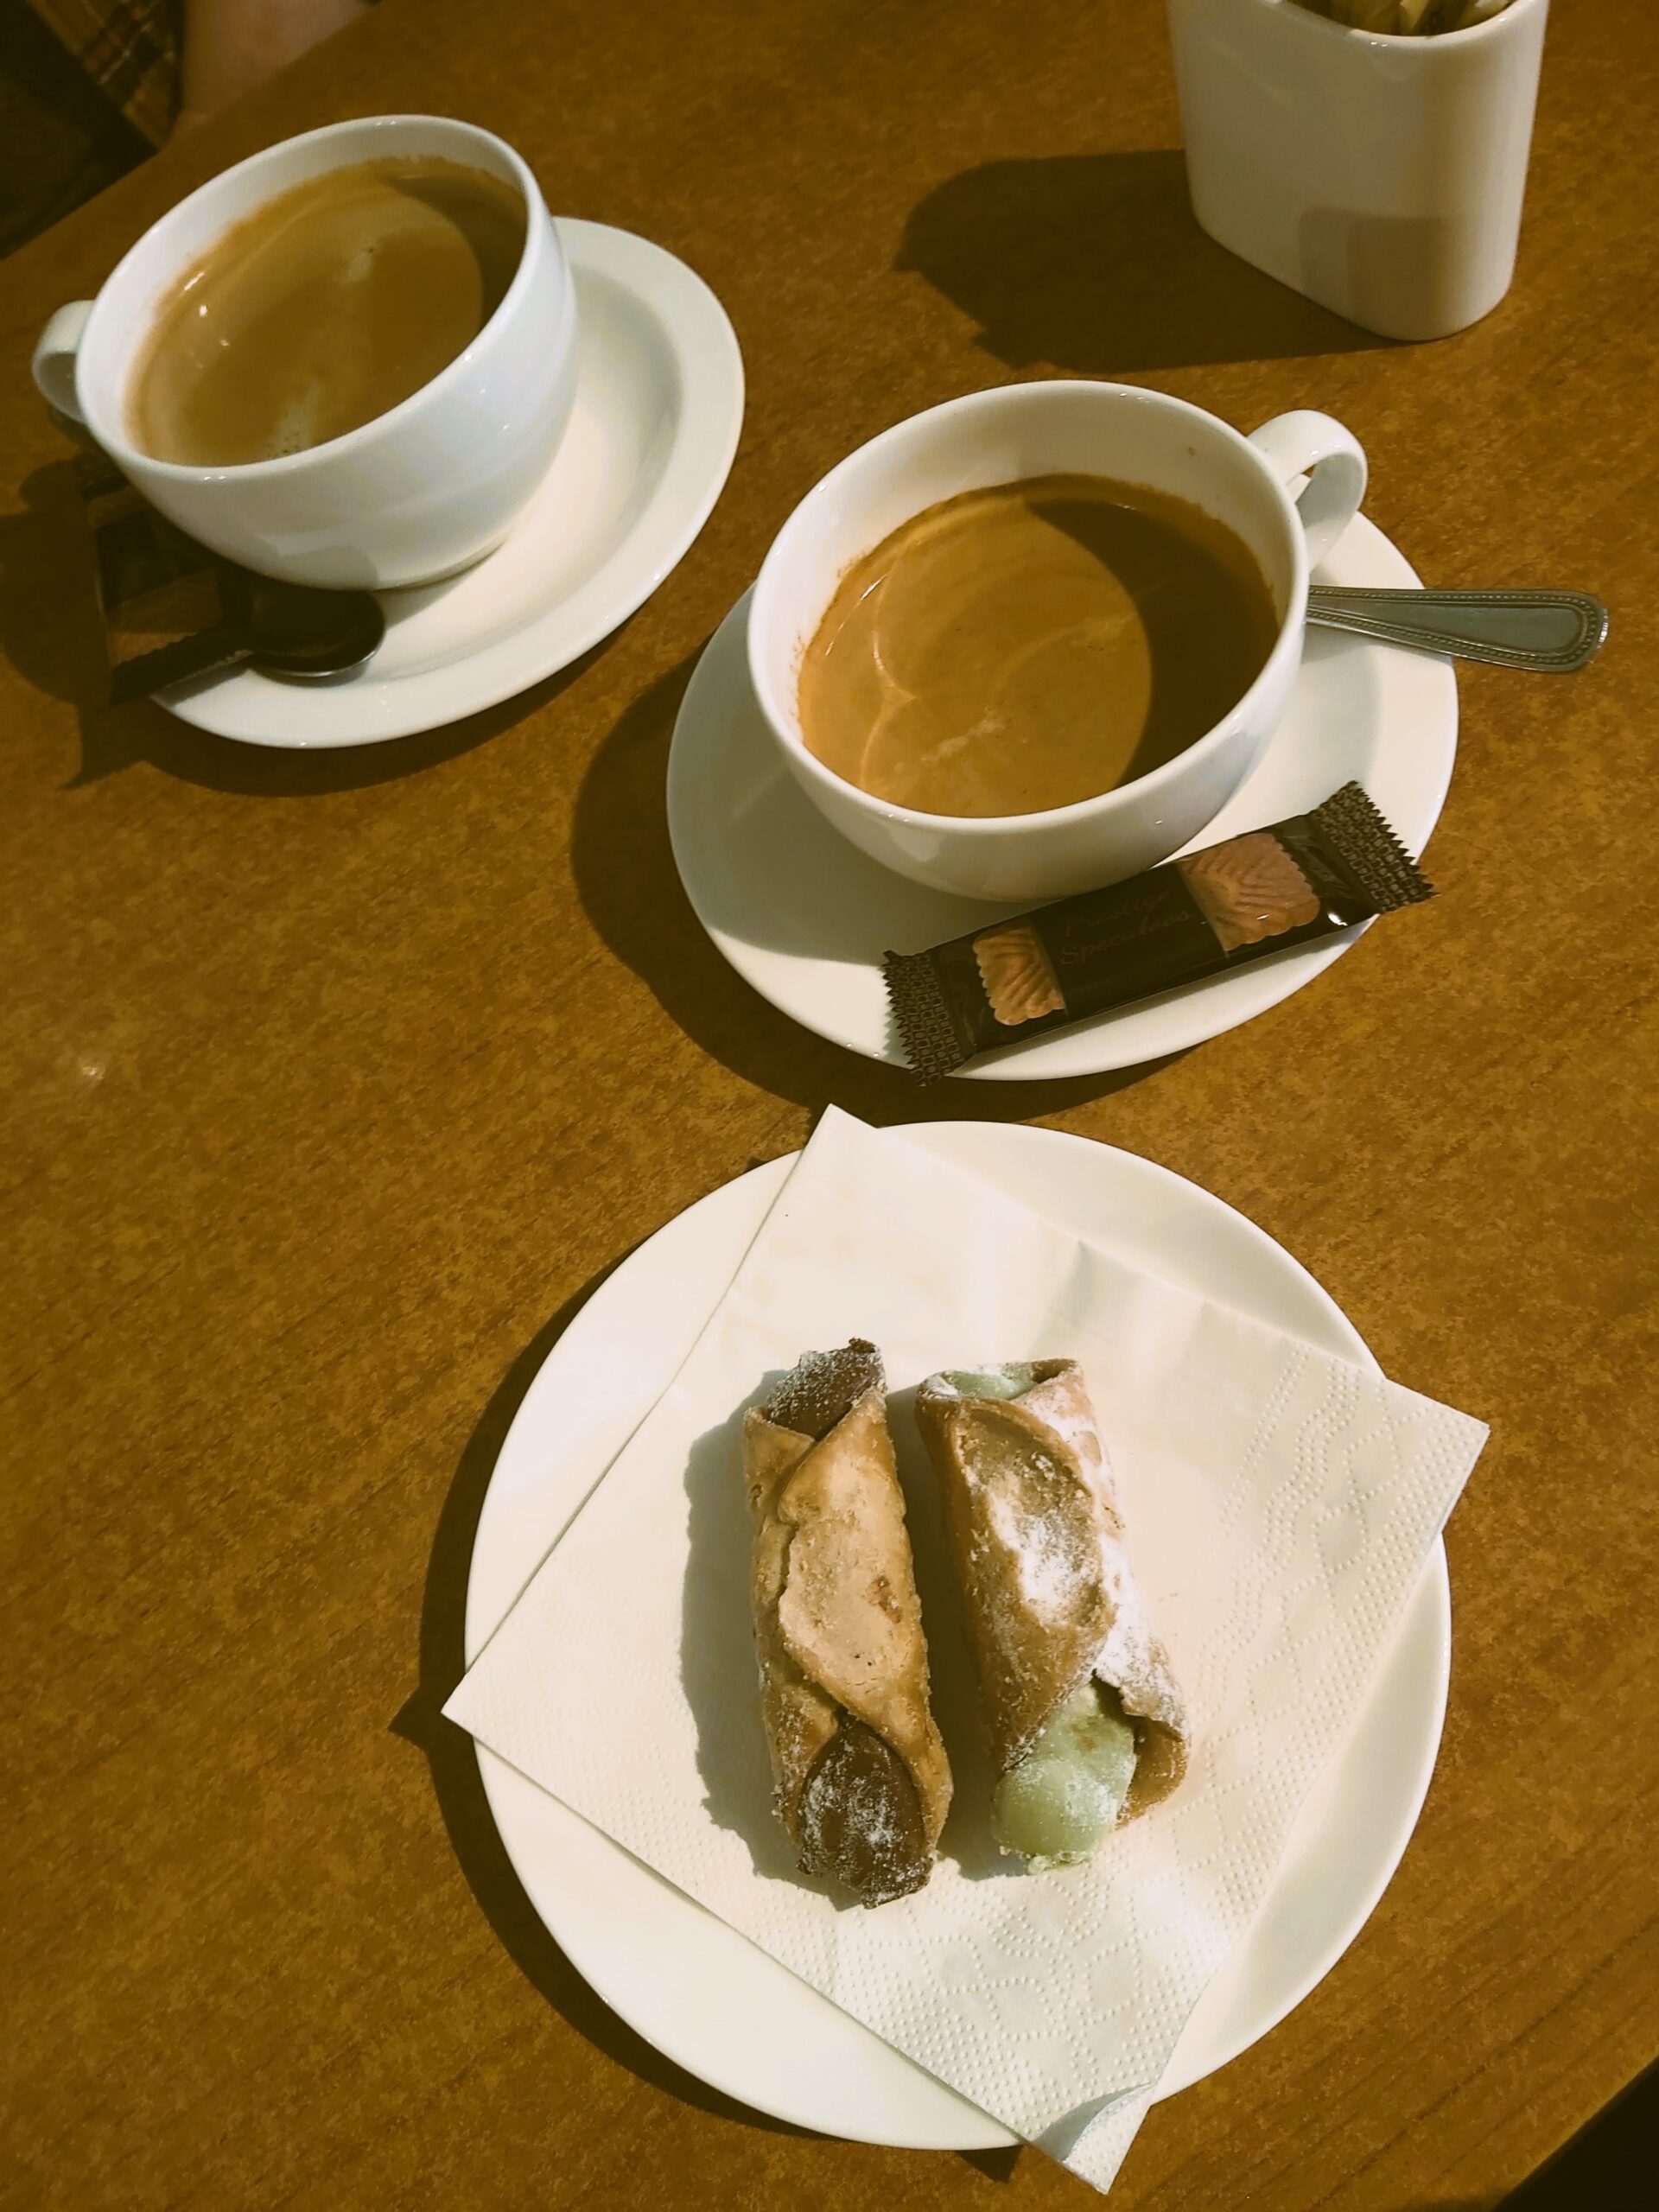 Coffee and cannoli at Milady Cafe in Ware, England